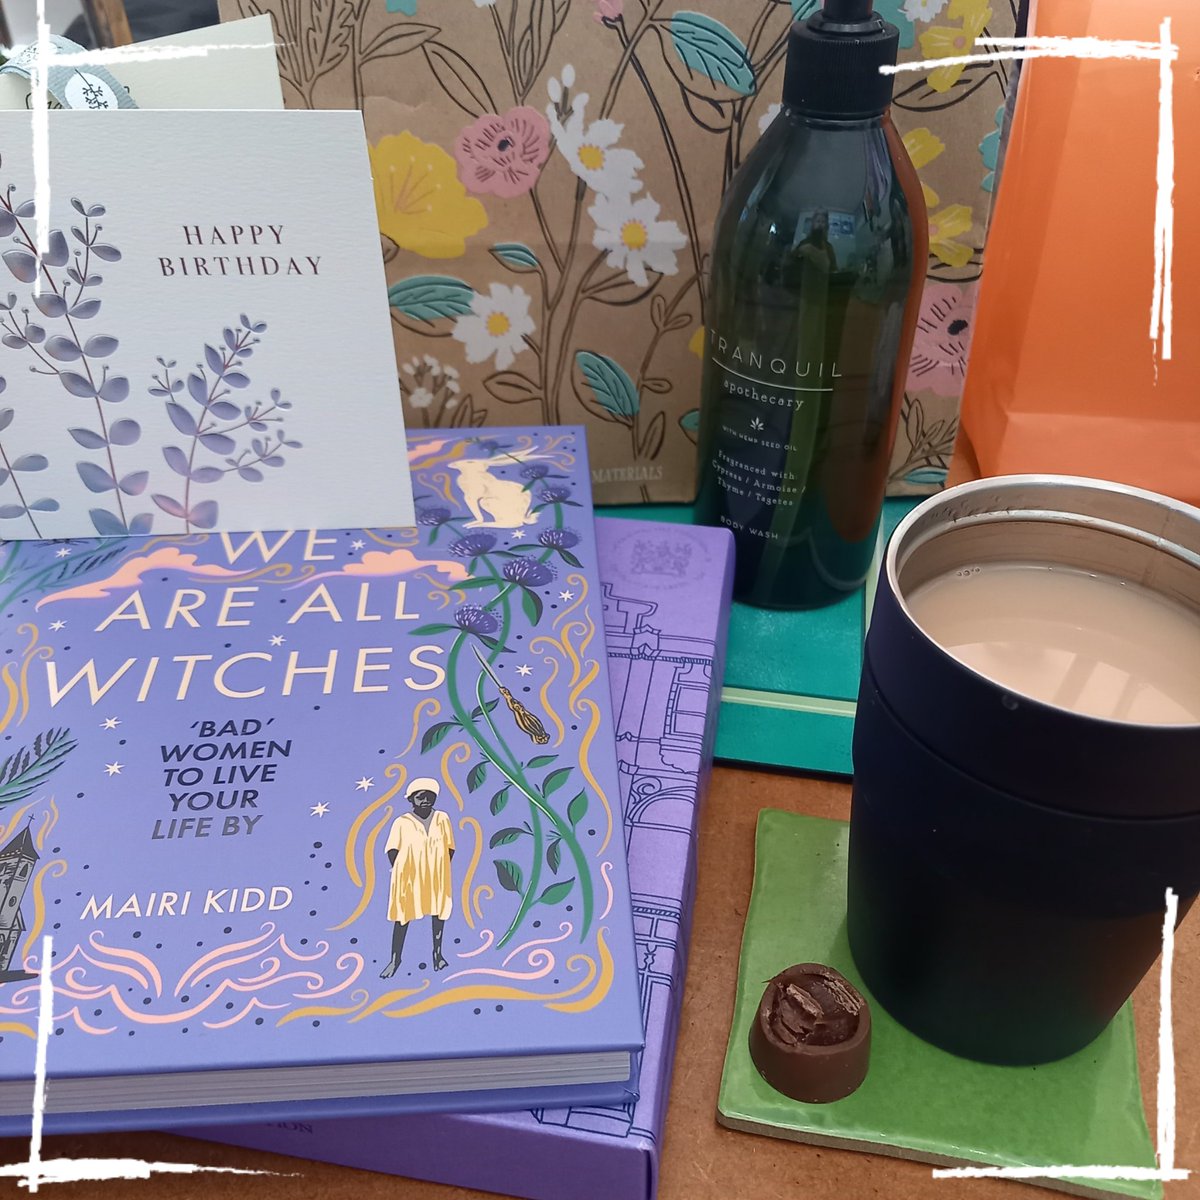 Coffee ✅️ Chocolates ✅ Brilliant new book by @Nighneag I'm about to get stuck into ️✅️ Whilst listening to the fabulous album from @healandharrow inspired by the stories I'm about to read ✅️